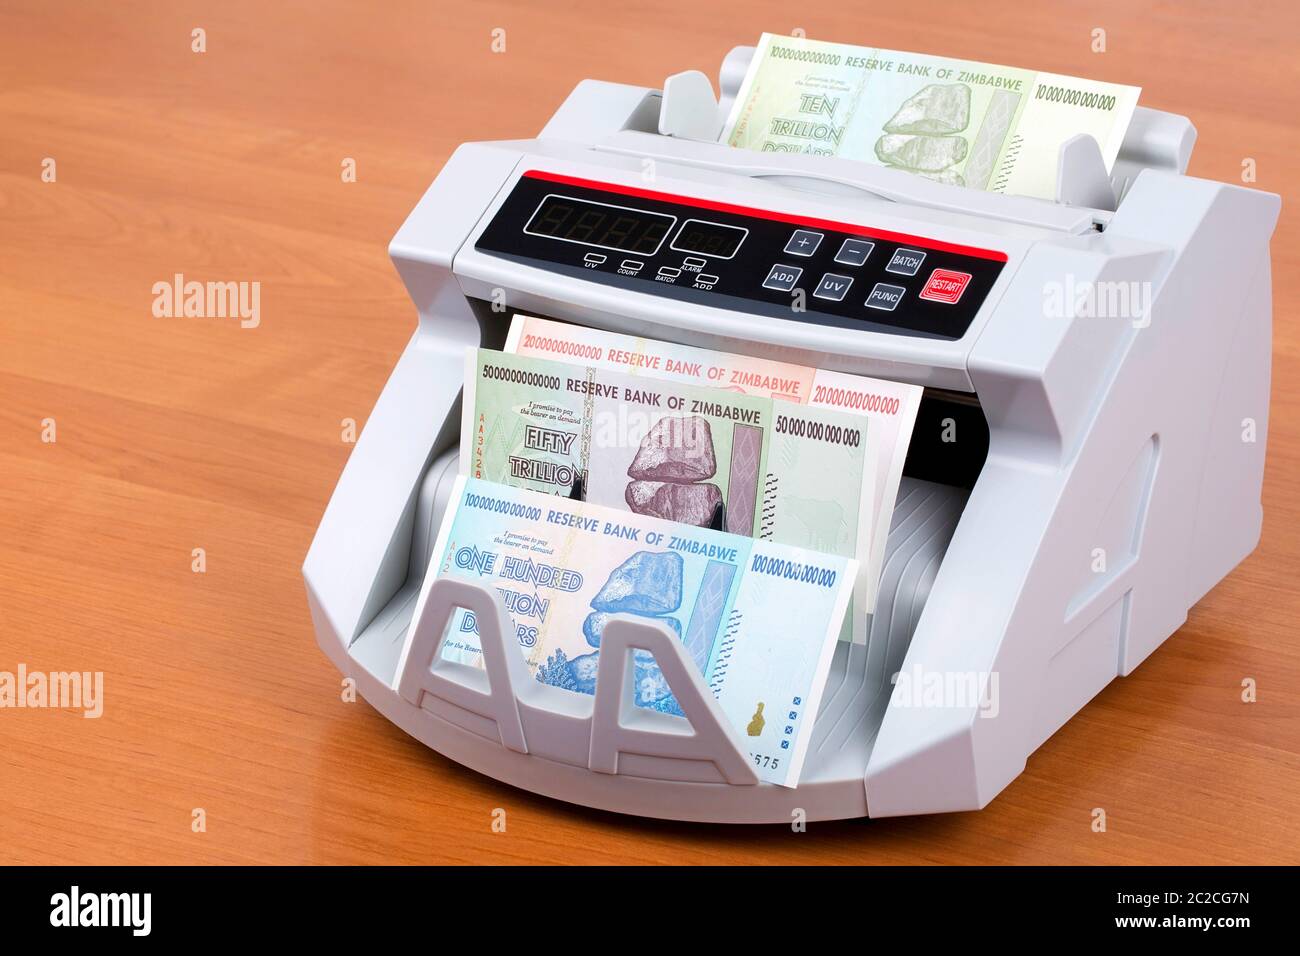 Trillion dollars from Zimbabwe in a counting machine Stock Photo